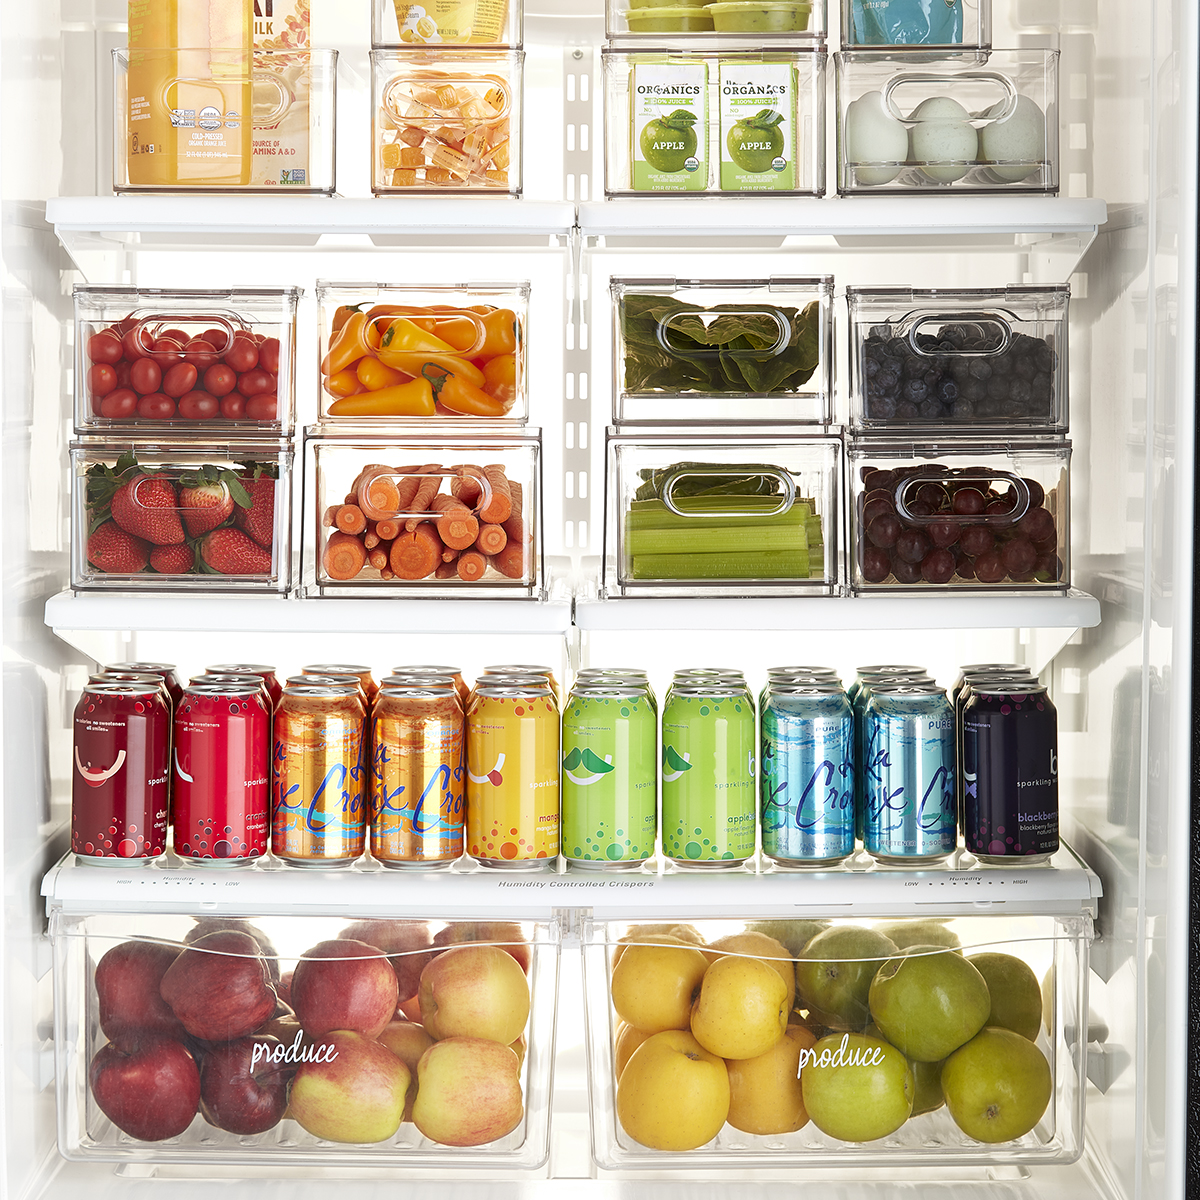 https://images.containerstore.com/catalogimages/390228/SU_20_THE-Inside-Fridge_RGB.jpg